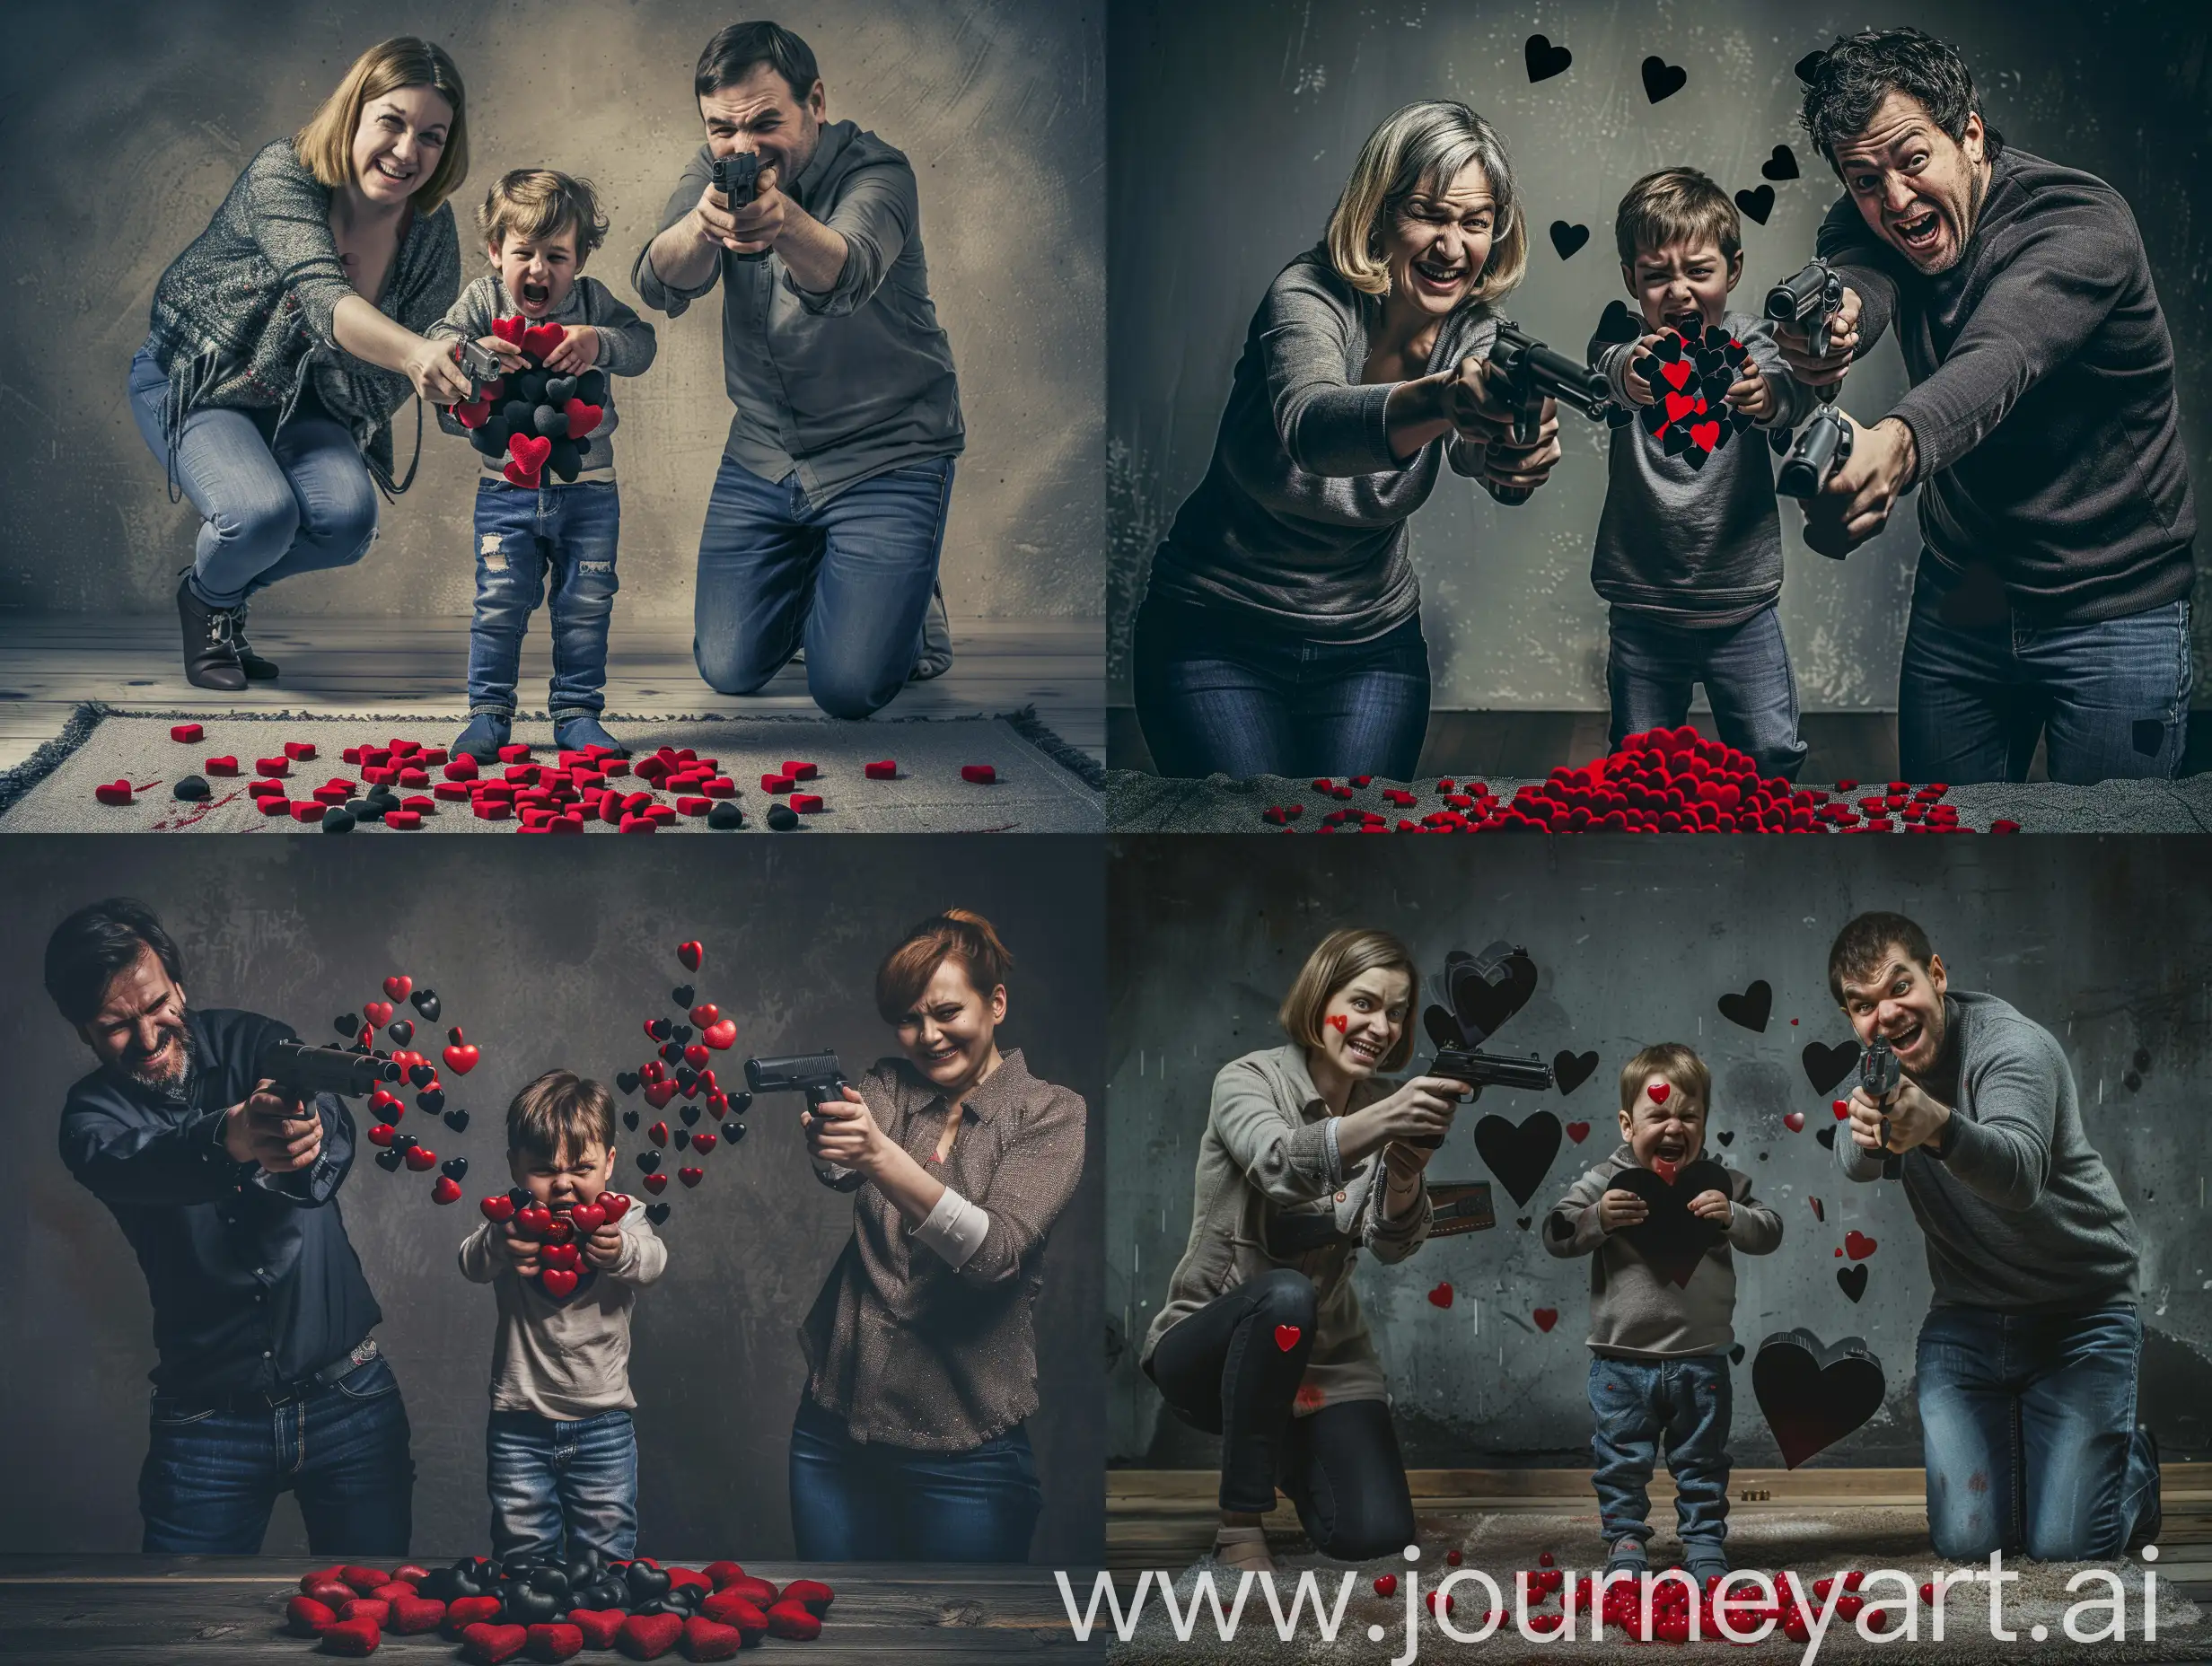 Cinematic dark horror photo of A weird smiling middle-aged man and woman pointed their guns at the head of the child standing between them. A middle-aged man and woman pointed their guns and shot many red hearts out of the barrel towards the cute little child standing between them. The child cried pitifully and held many black hearts in his embrace. There was a pile of hearts on the floor under the child's feet.